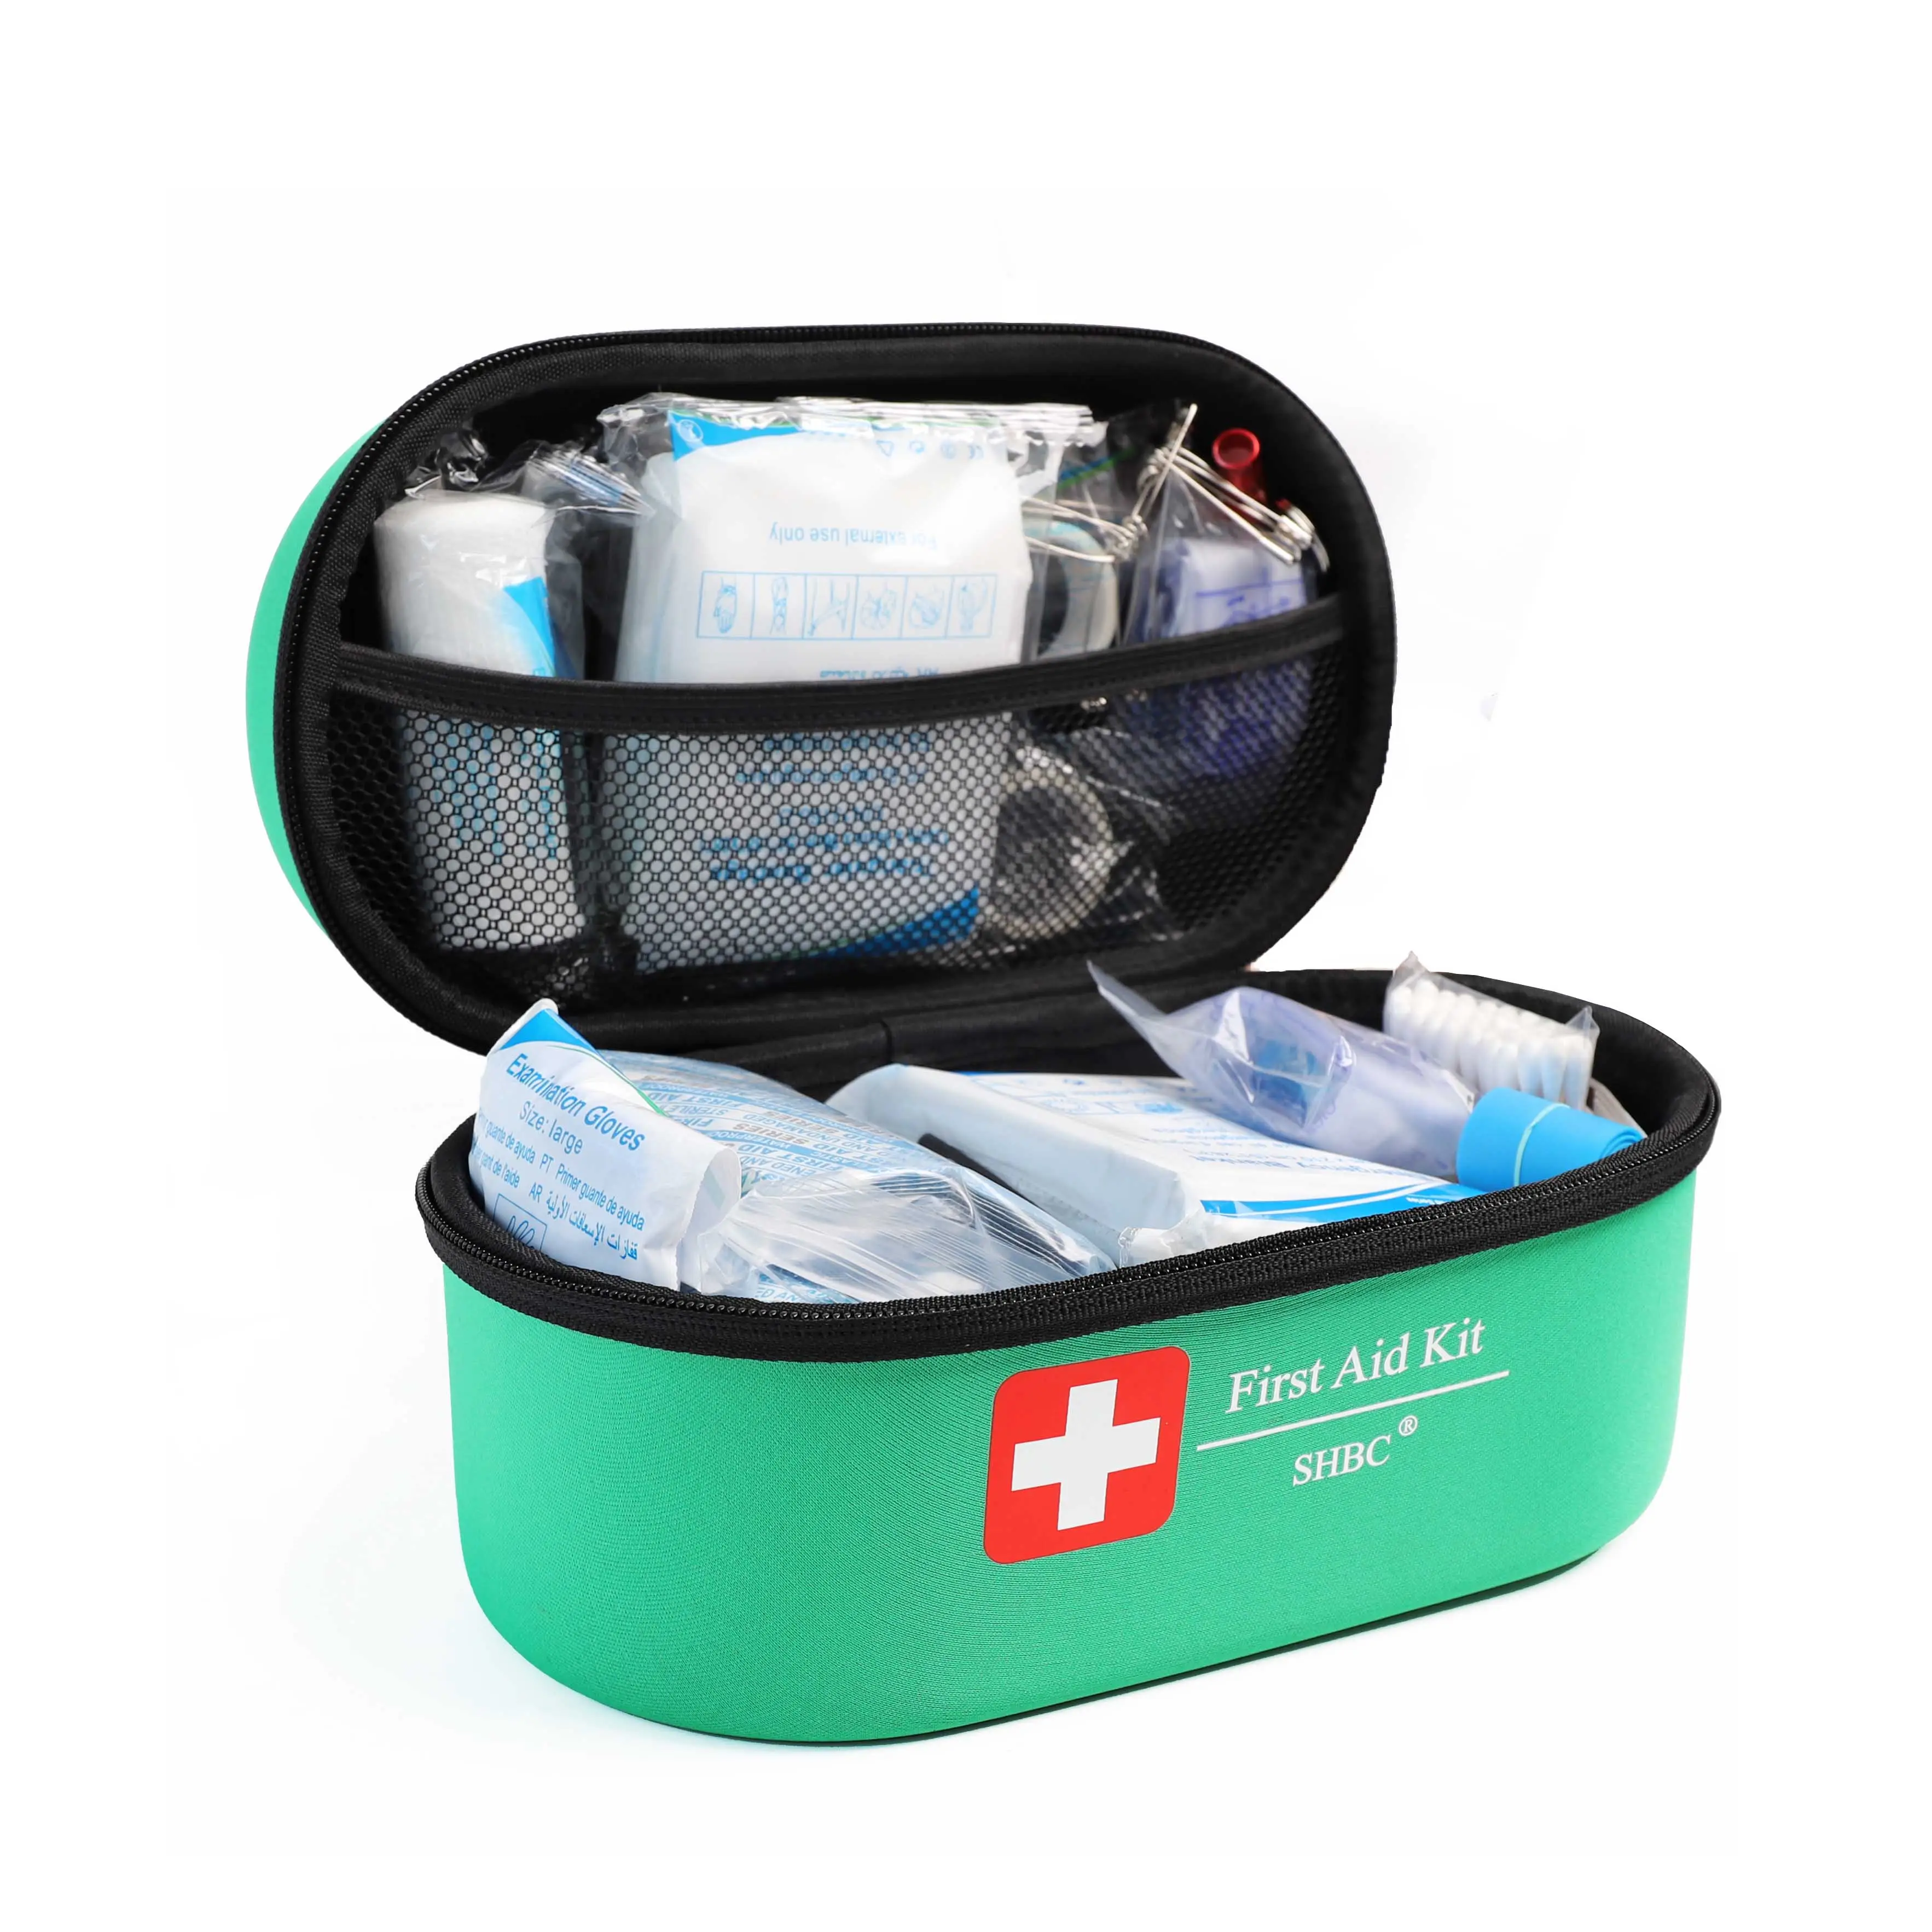 EVA 152 Pieces First Aid Kit For Car, Travel, Camping, Home, Office, Sports, Survival